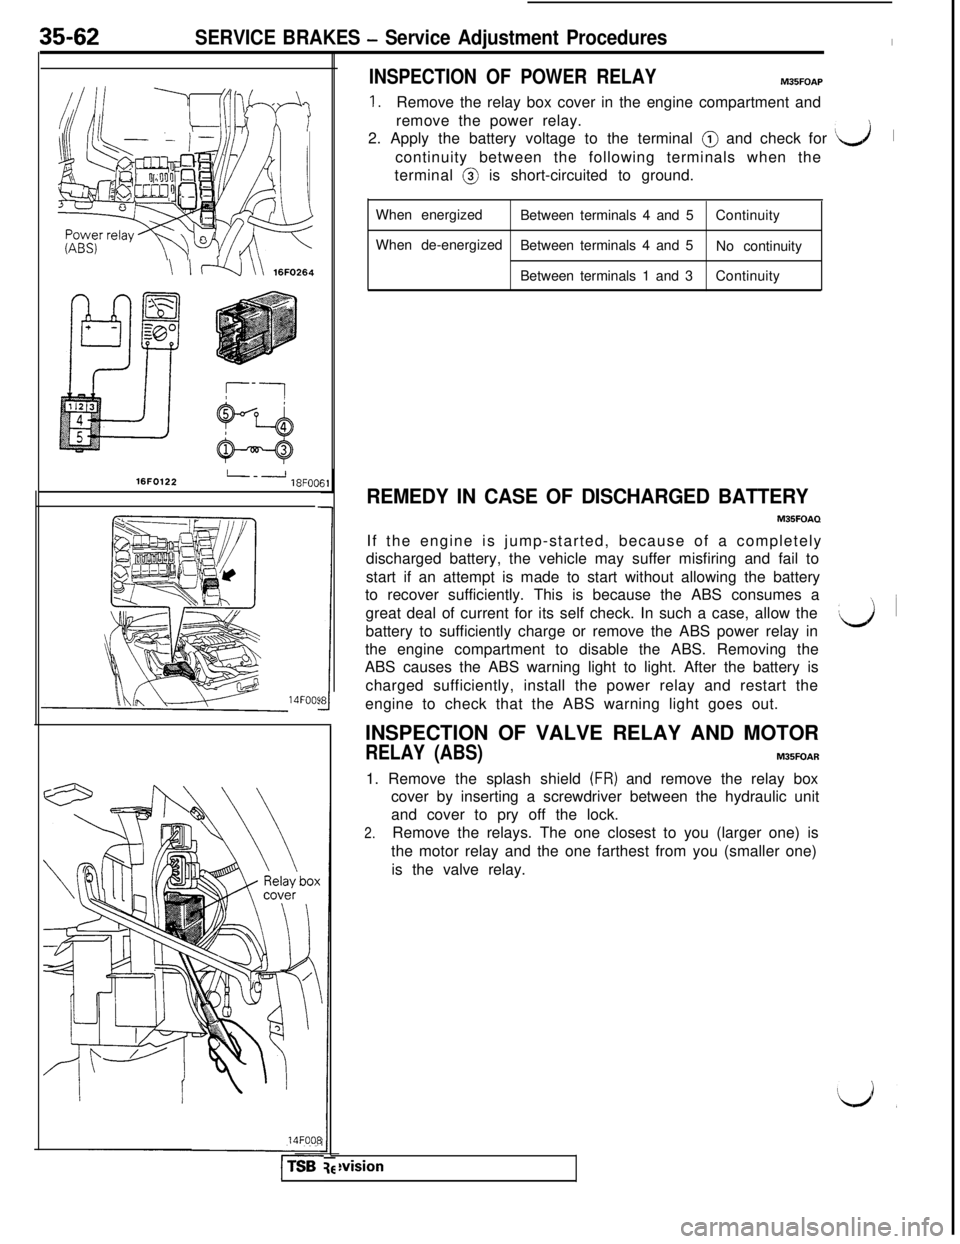 MITSUBISHI 3000GT 1991  Service Manual When energized
Between terminals 4 and 5Continuity
When de-energized
Between terminals 4 and 5\i fl \\ 16FO264No continuity
Between terminals 1 and 3Continuity
16FO122L--J18FOCII
SERVICE BRAKES - Serv